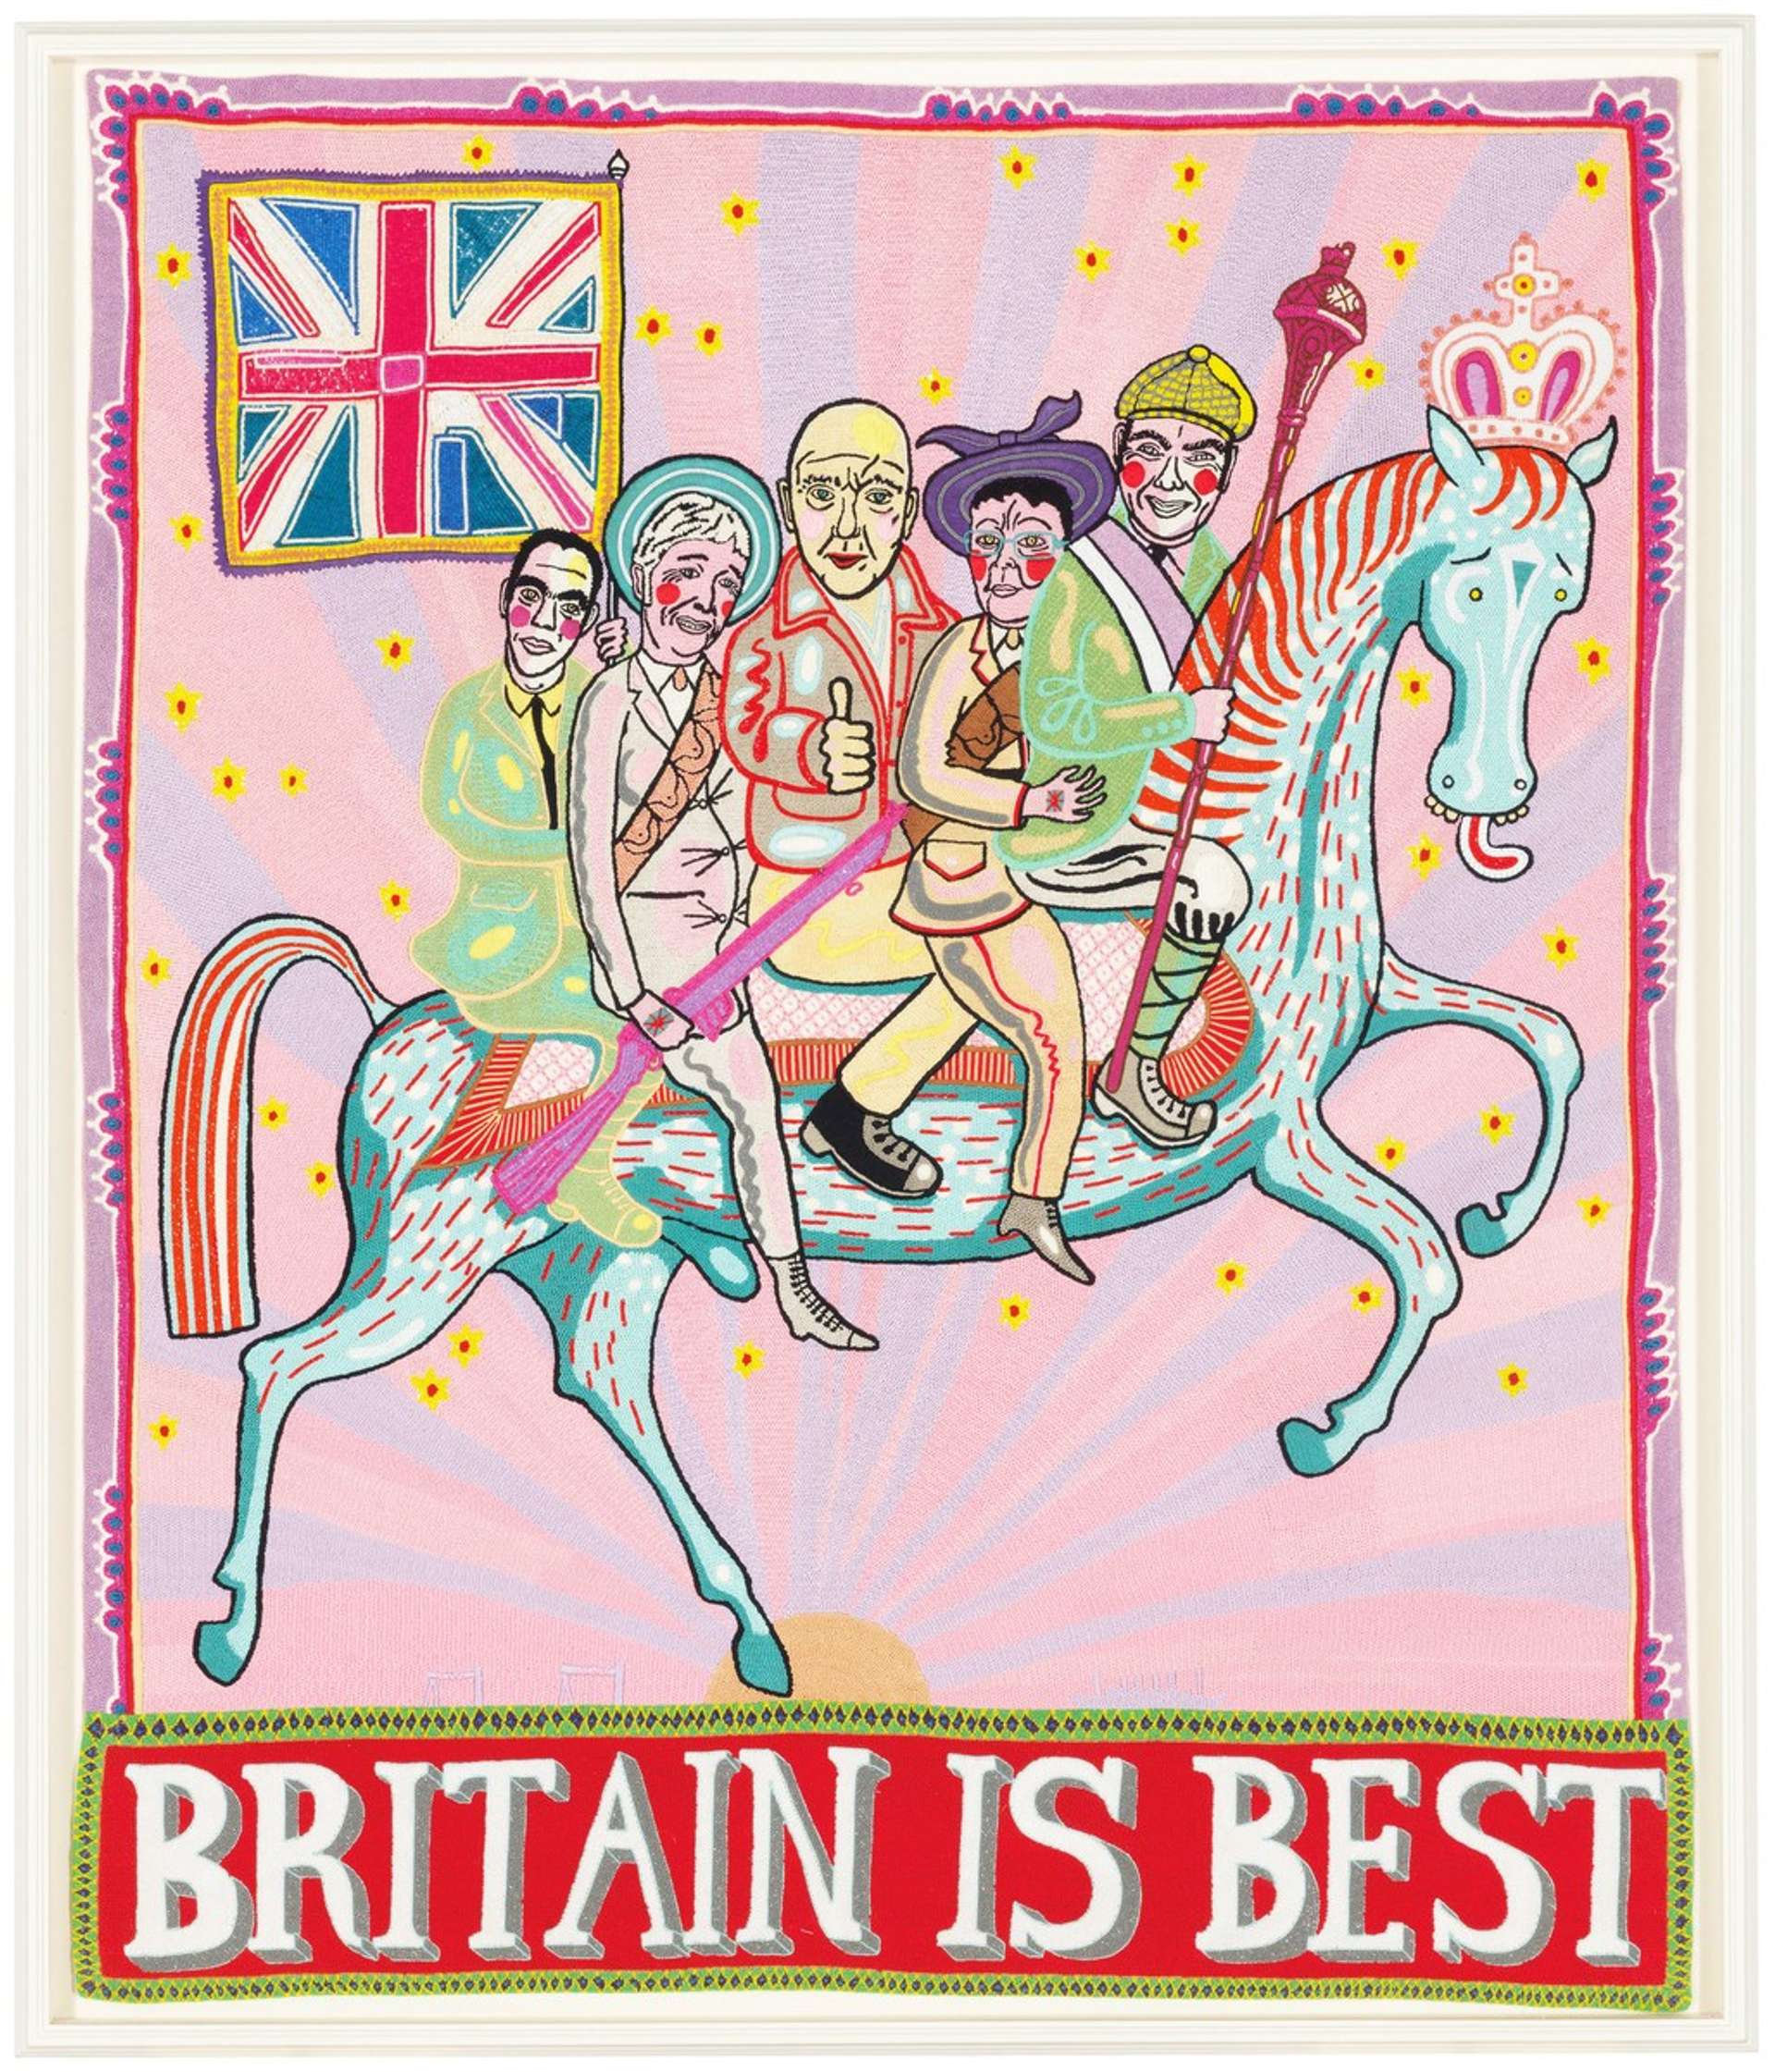 A vertical embroidery showing five men riding a light blue horse that wears the British Royal Crown, while the sun rises on a bright pink background. 